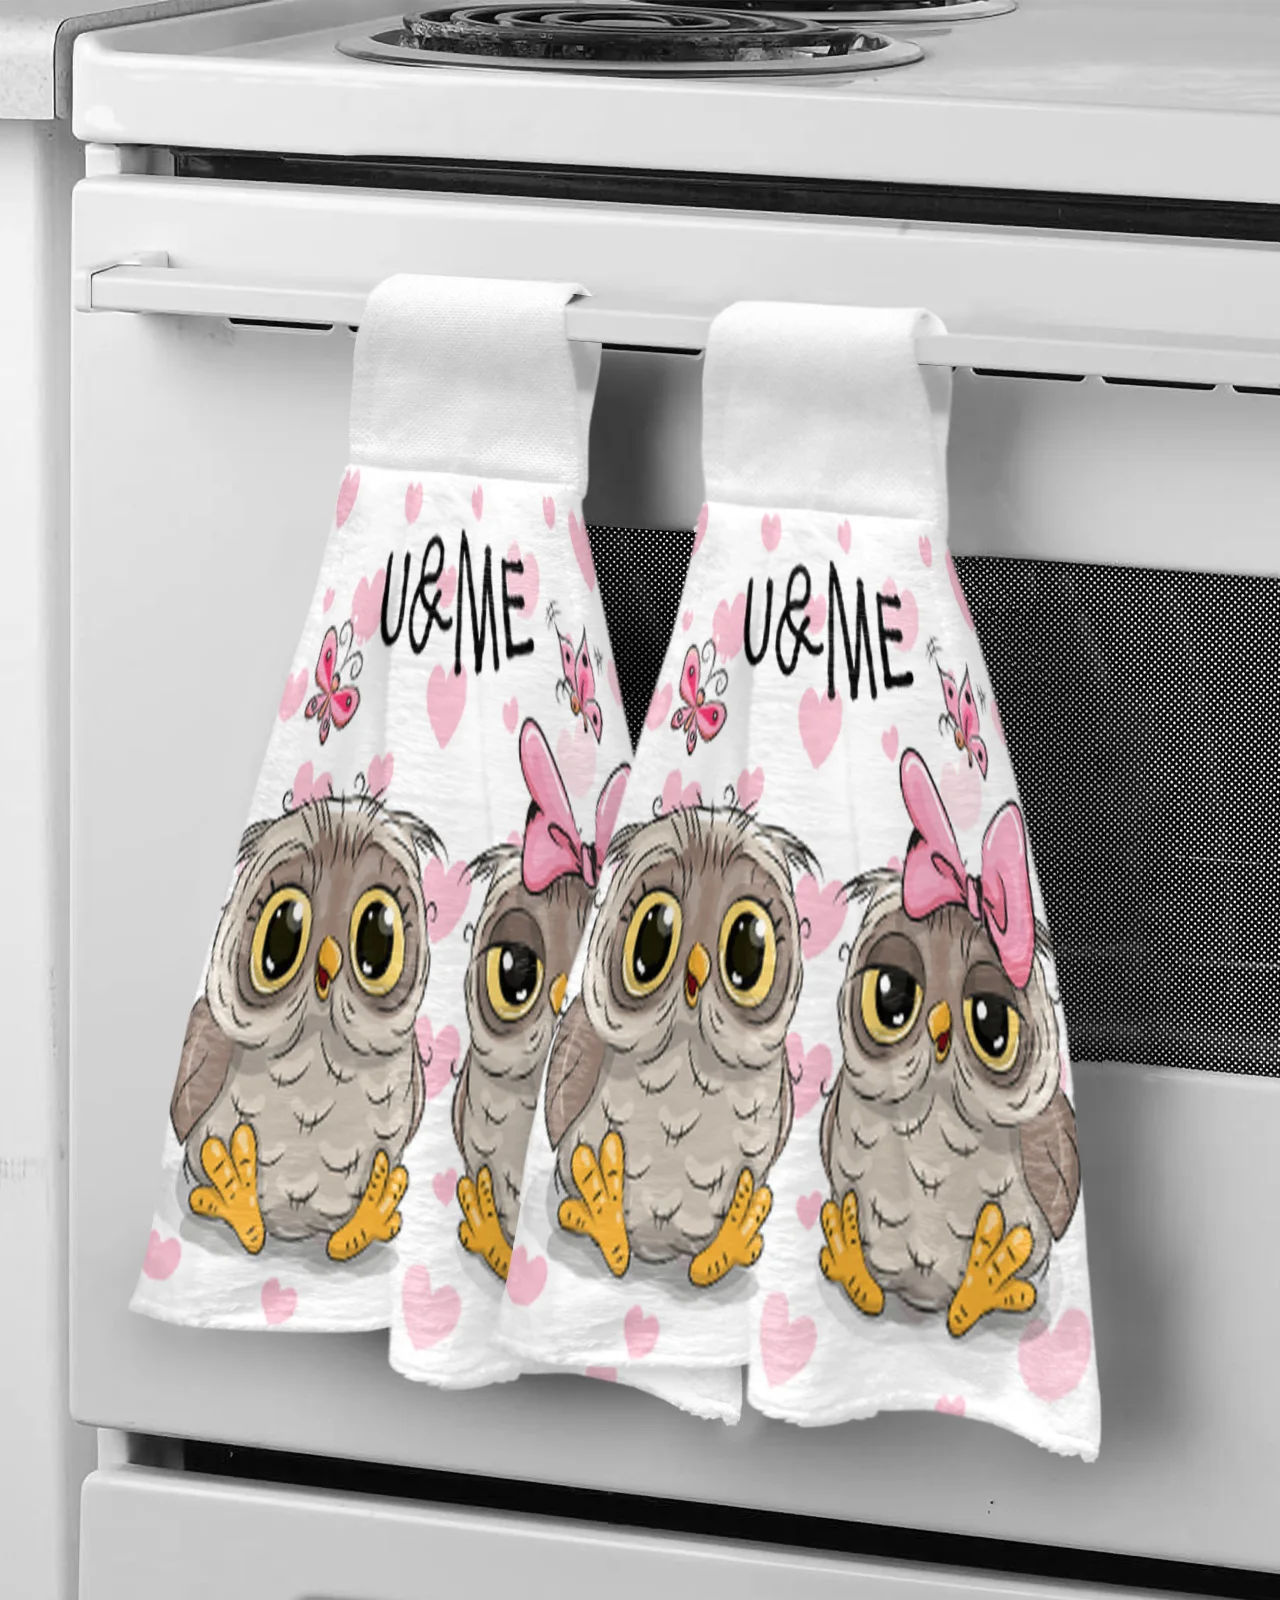 https://ae01.alicdn.com/kf/S1006c454fb0642599a2f67d385912f25m/Cartoon-Owl-Butterfly-Kitchen-Cleaning-Cloth-Absorbent-Hand-Towel-Household-Dish-Cloth-Kitchen-Towel.jpg